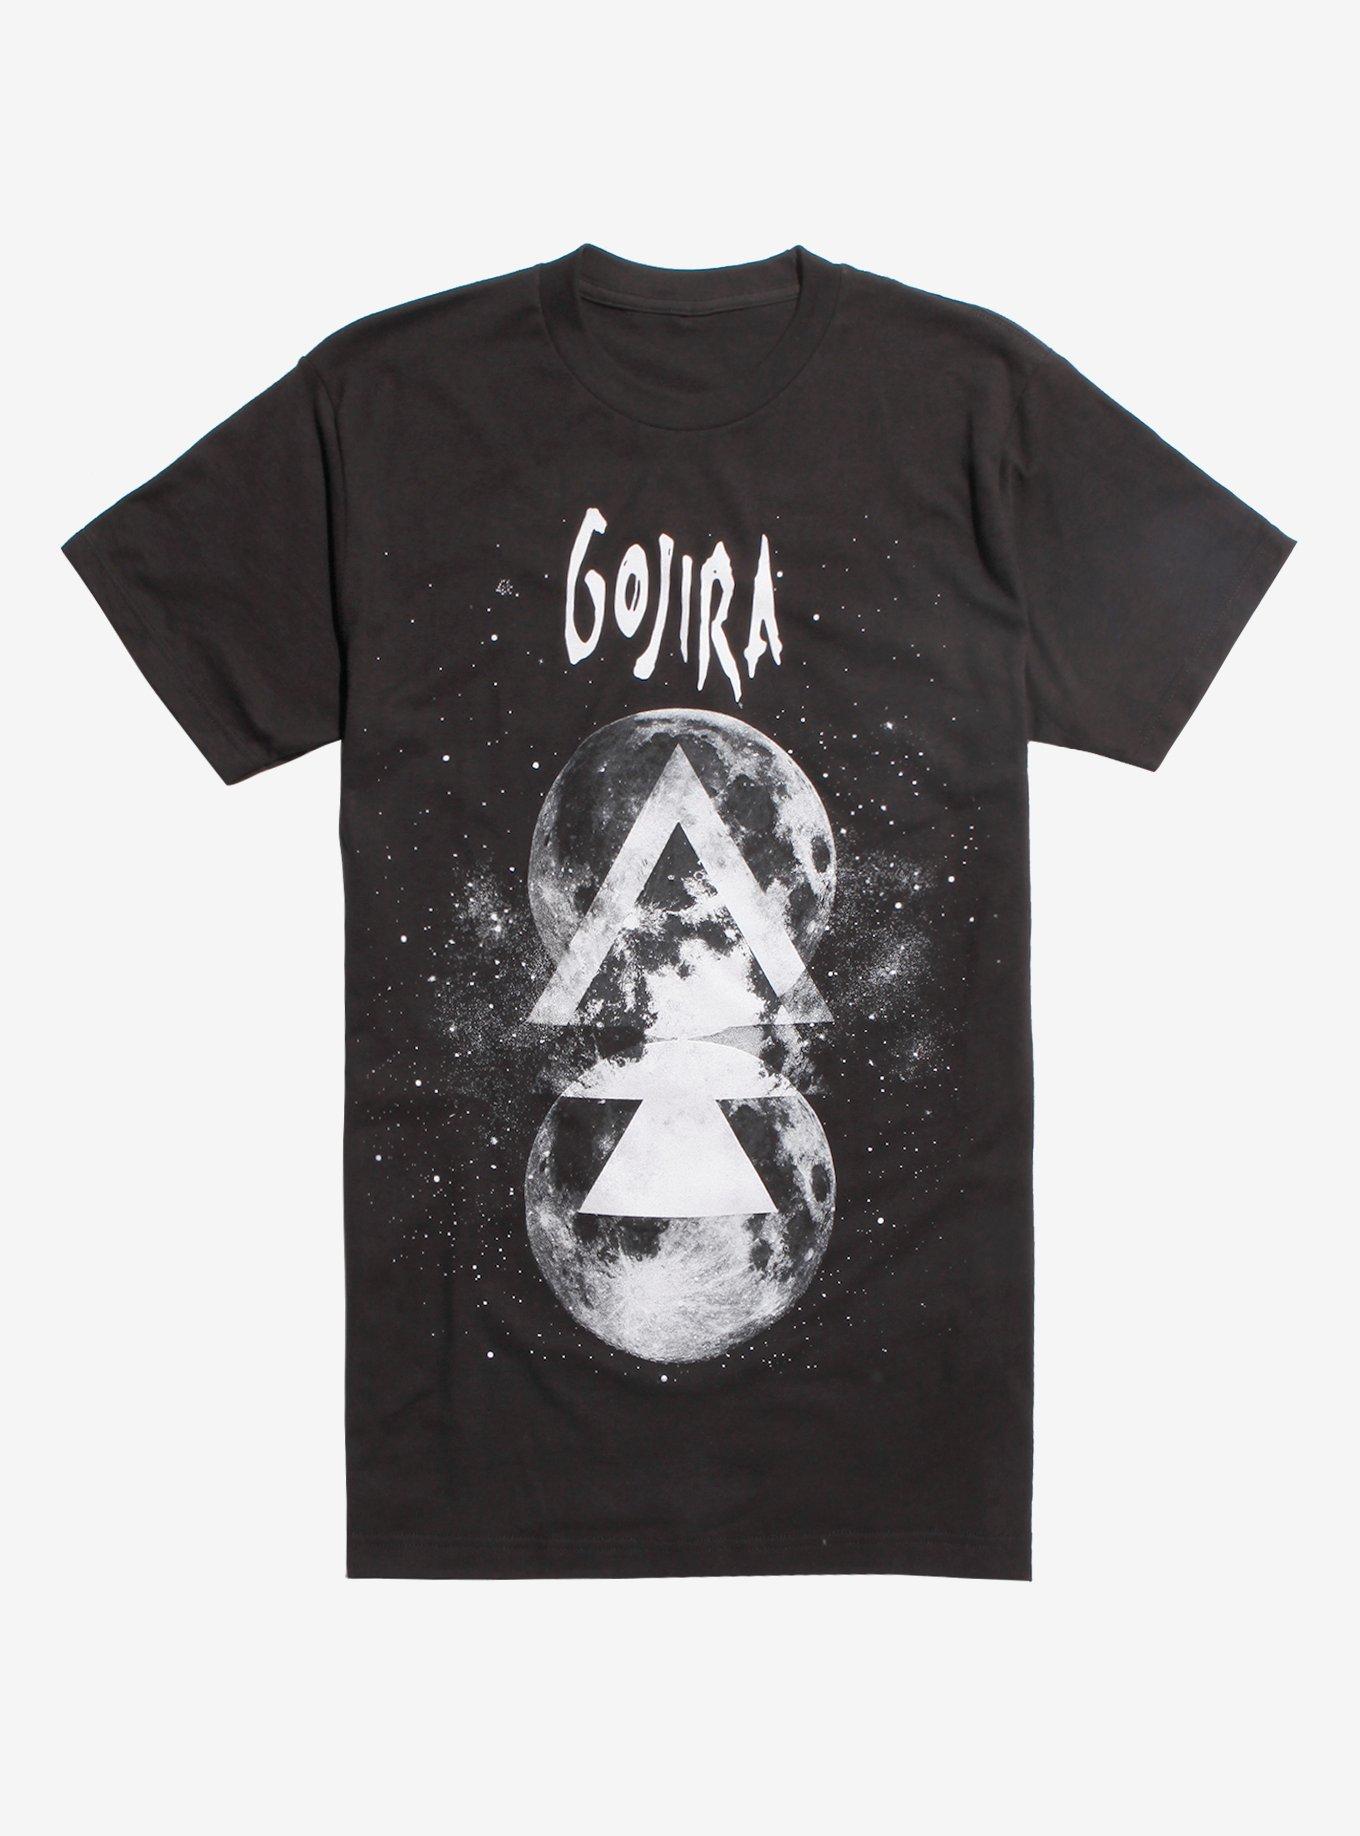 Gojira Two Moons In Space T-Shirt, BLACK, hi-res